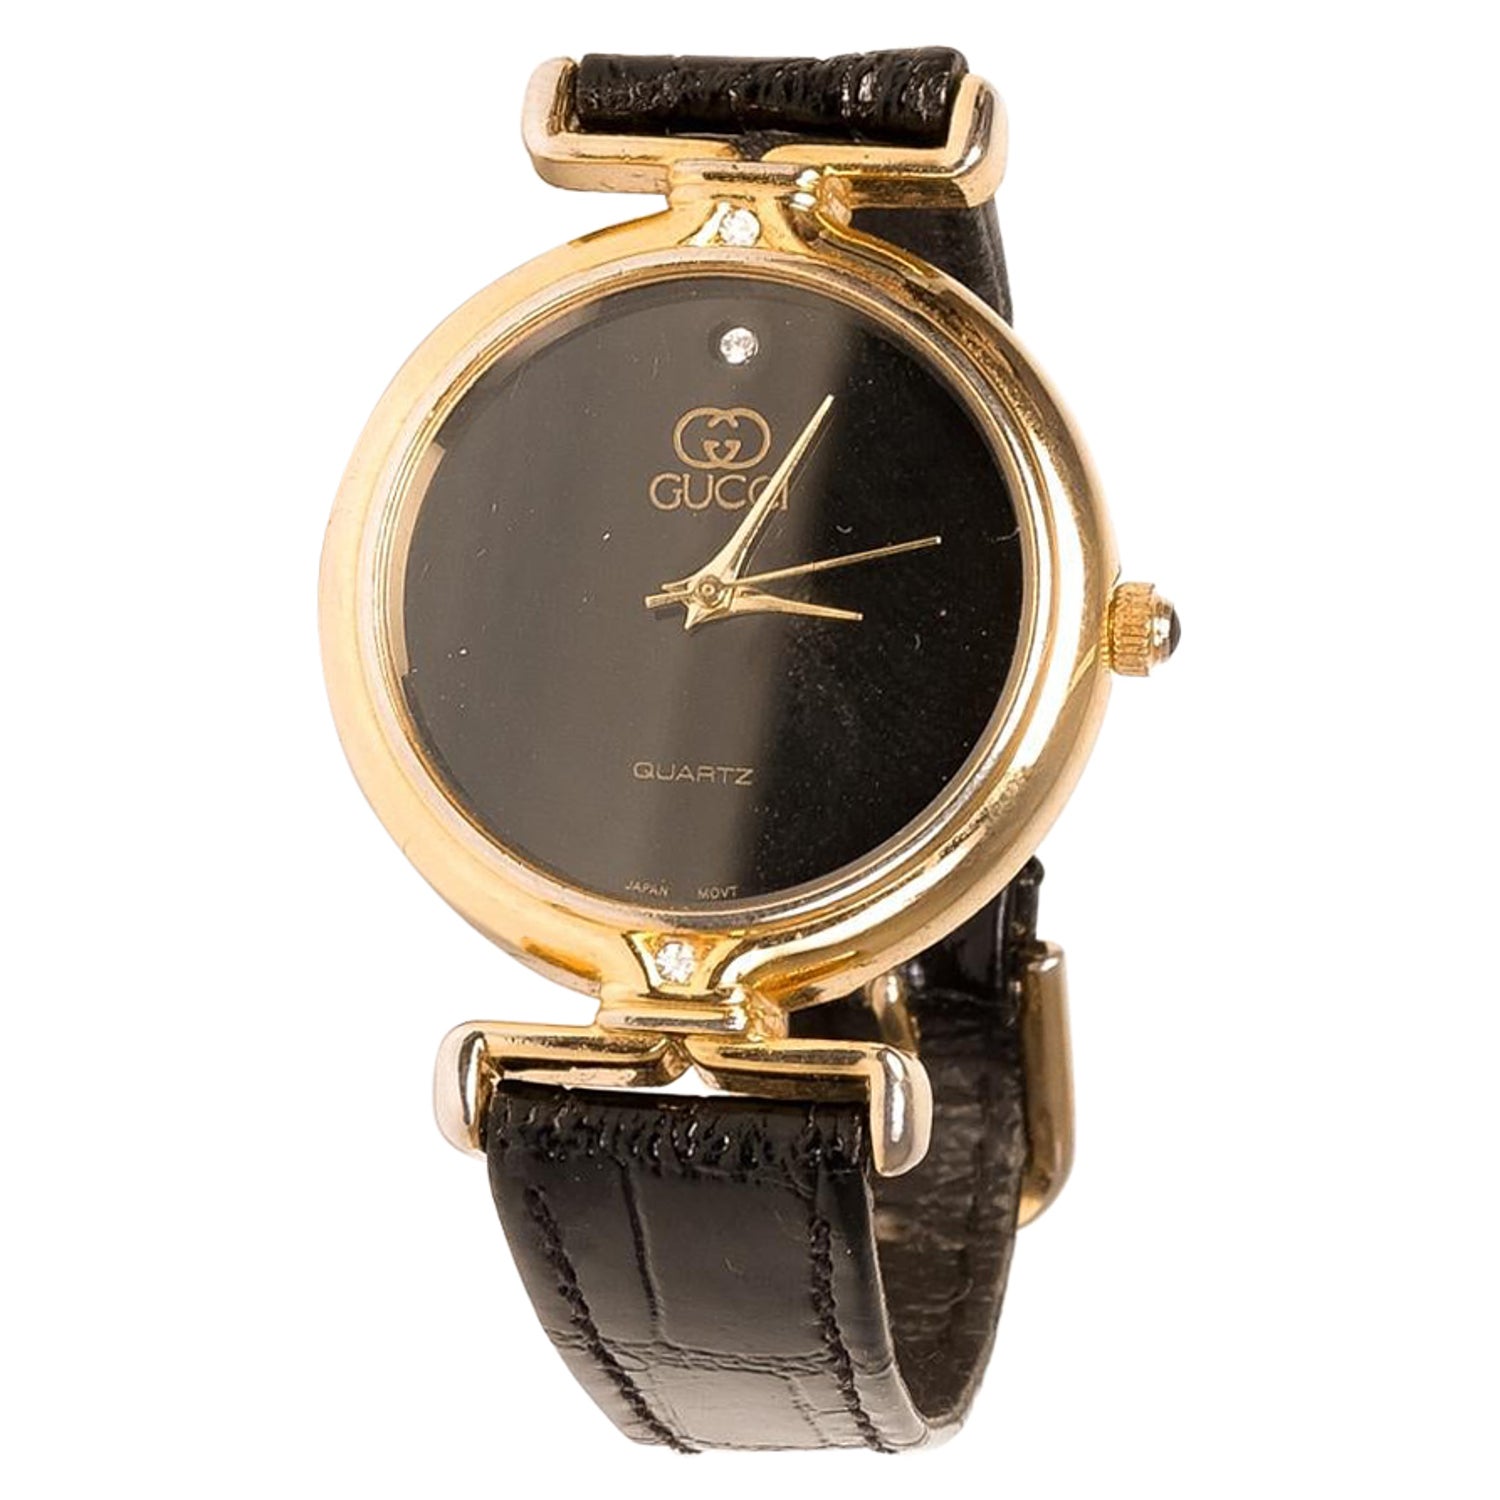 Gucci Gold Watch Vintage - For Sale on 1stDibs